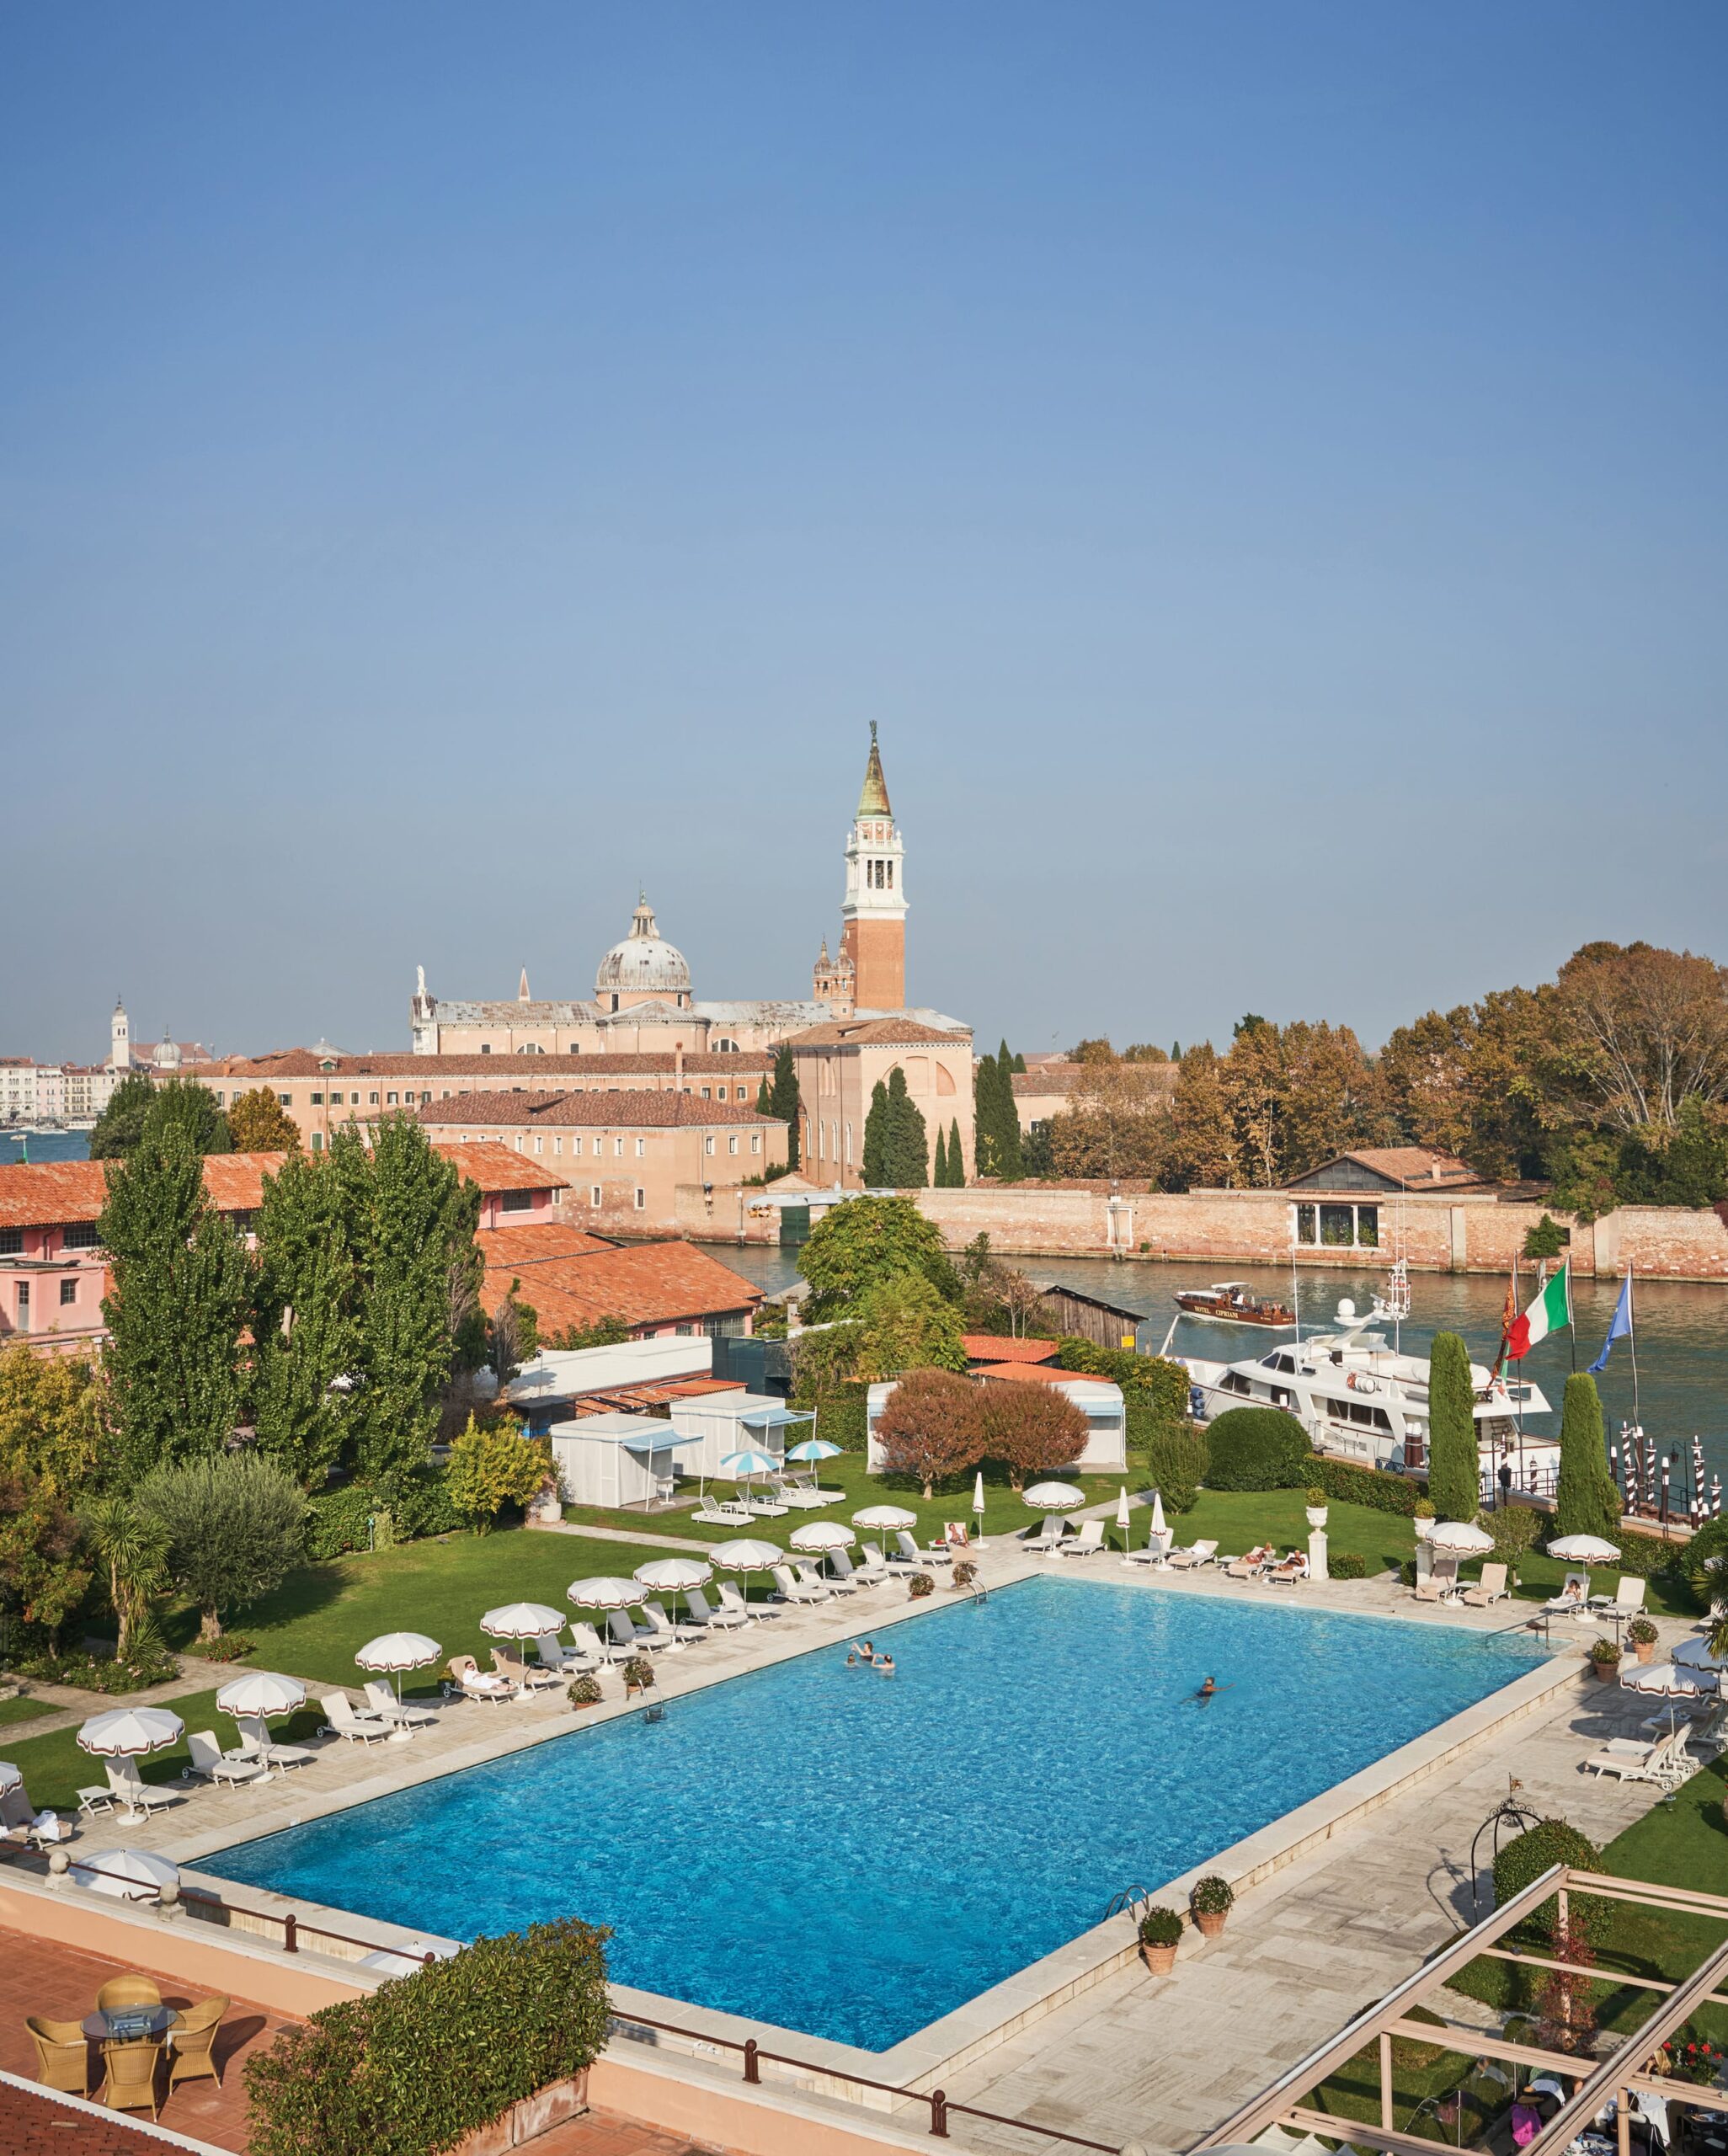 Why Belmond Hotel Cipriani, set on an island in the Venetian